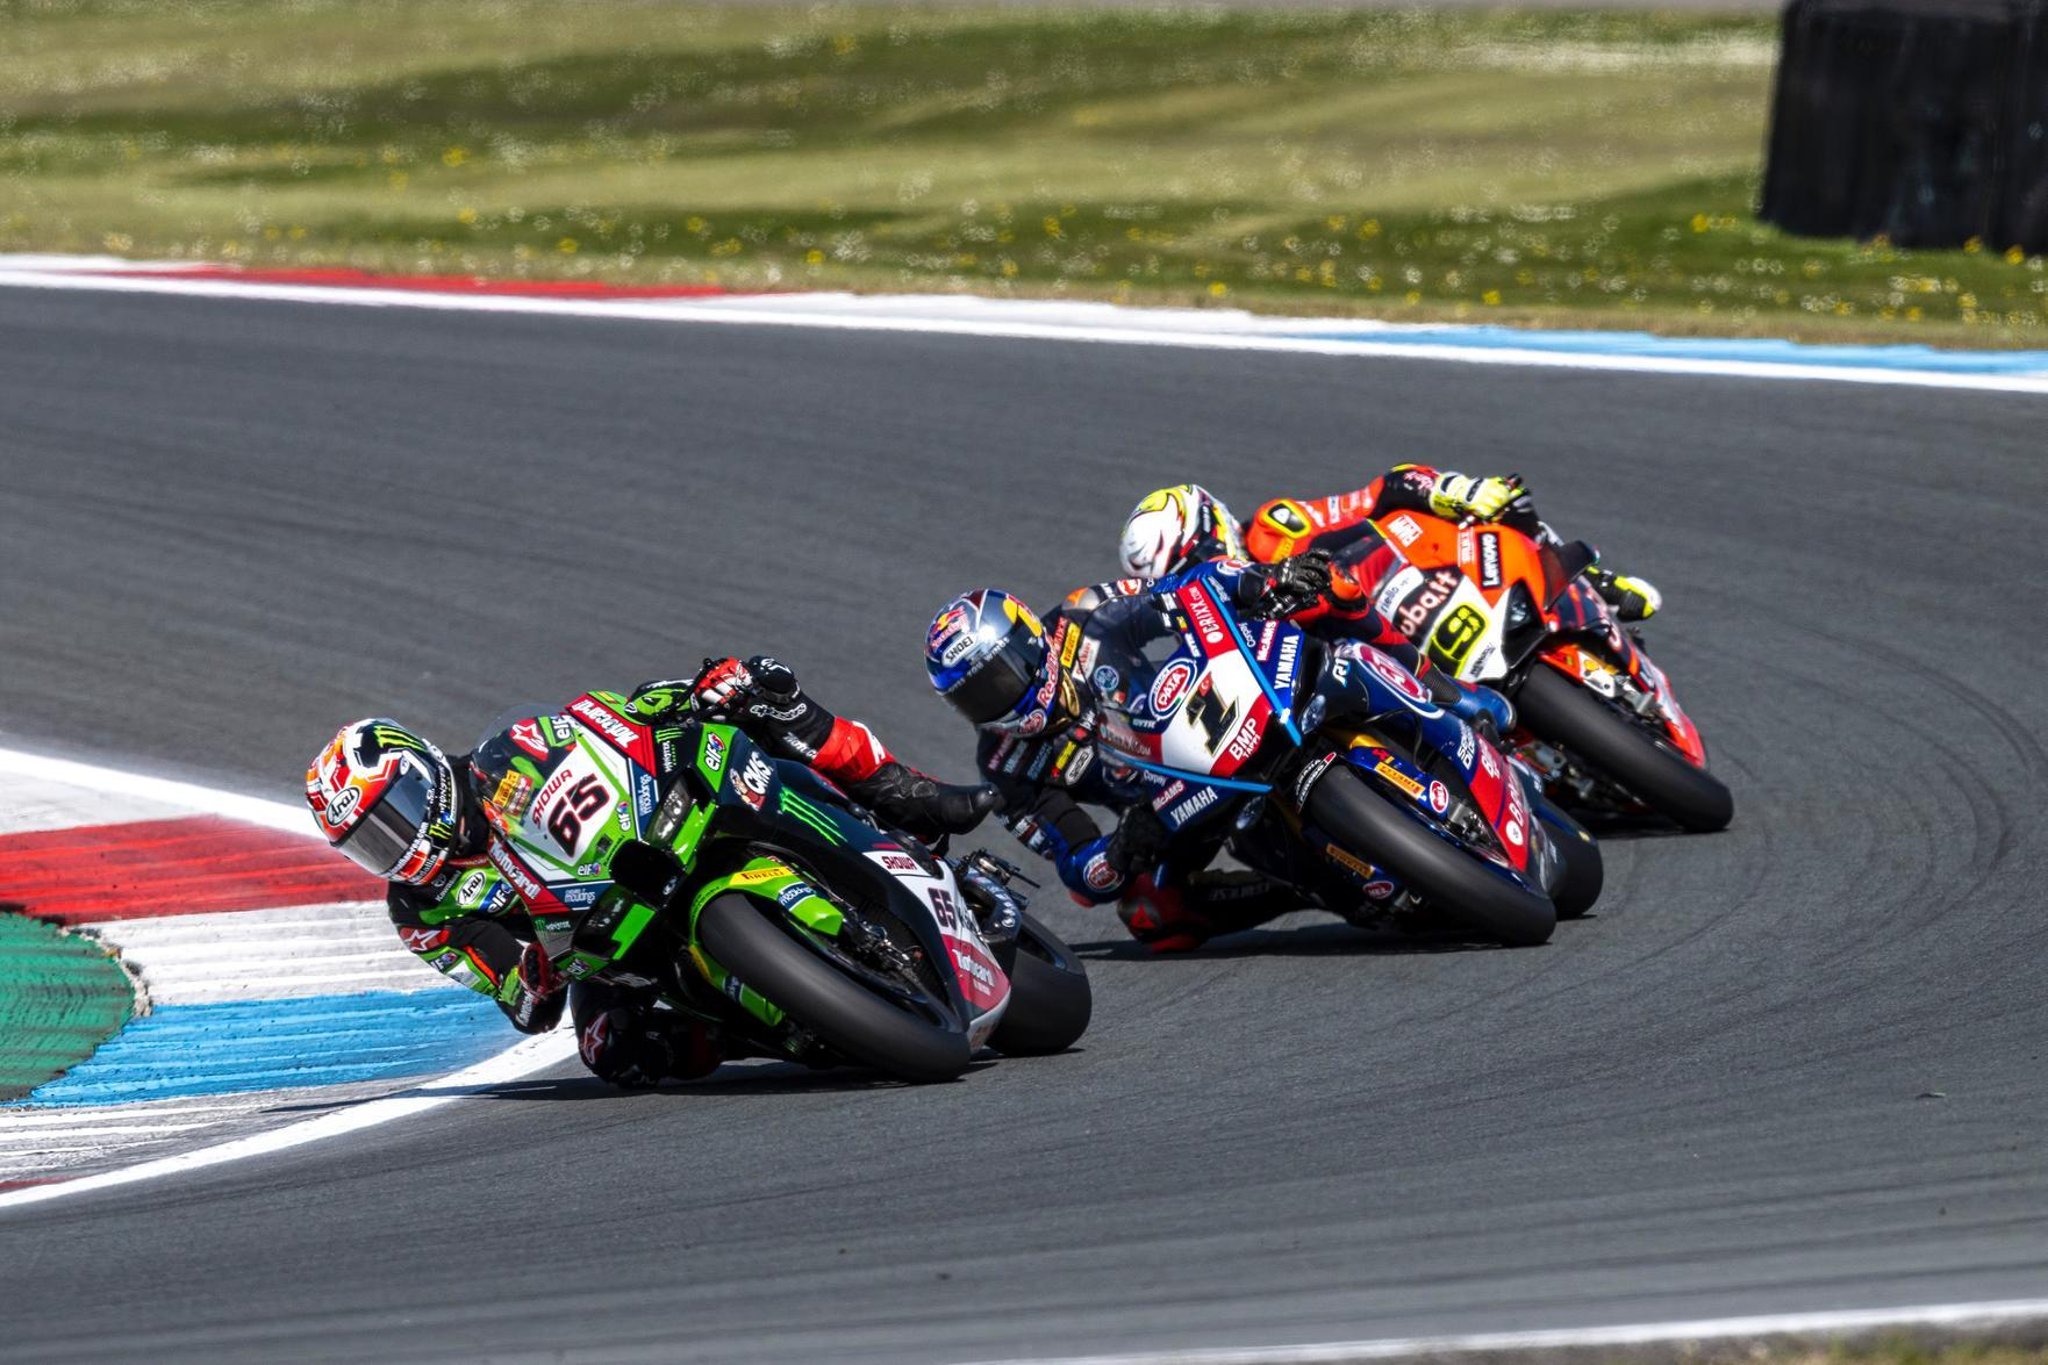 Dutch double for Jonathan Rea tempered by crash in final World Superbike race at Assen